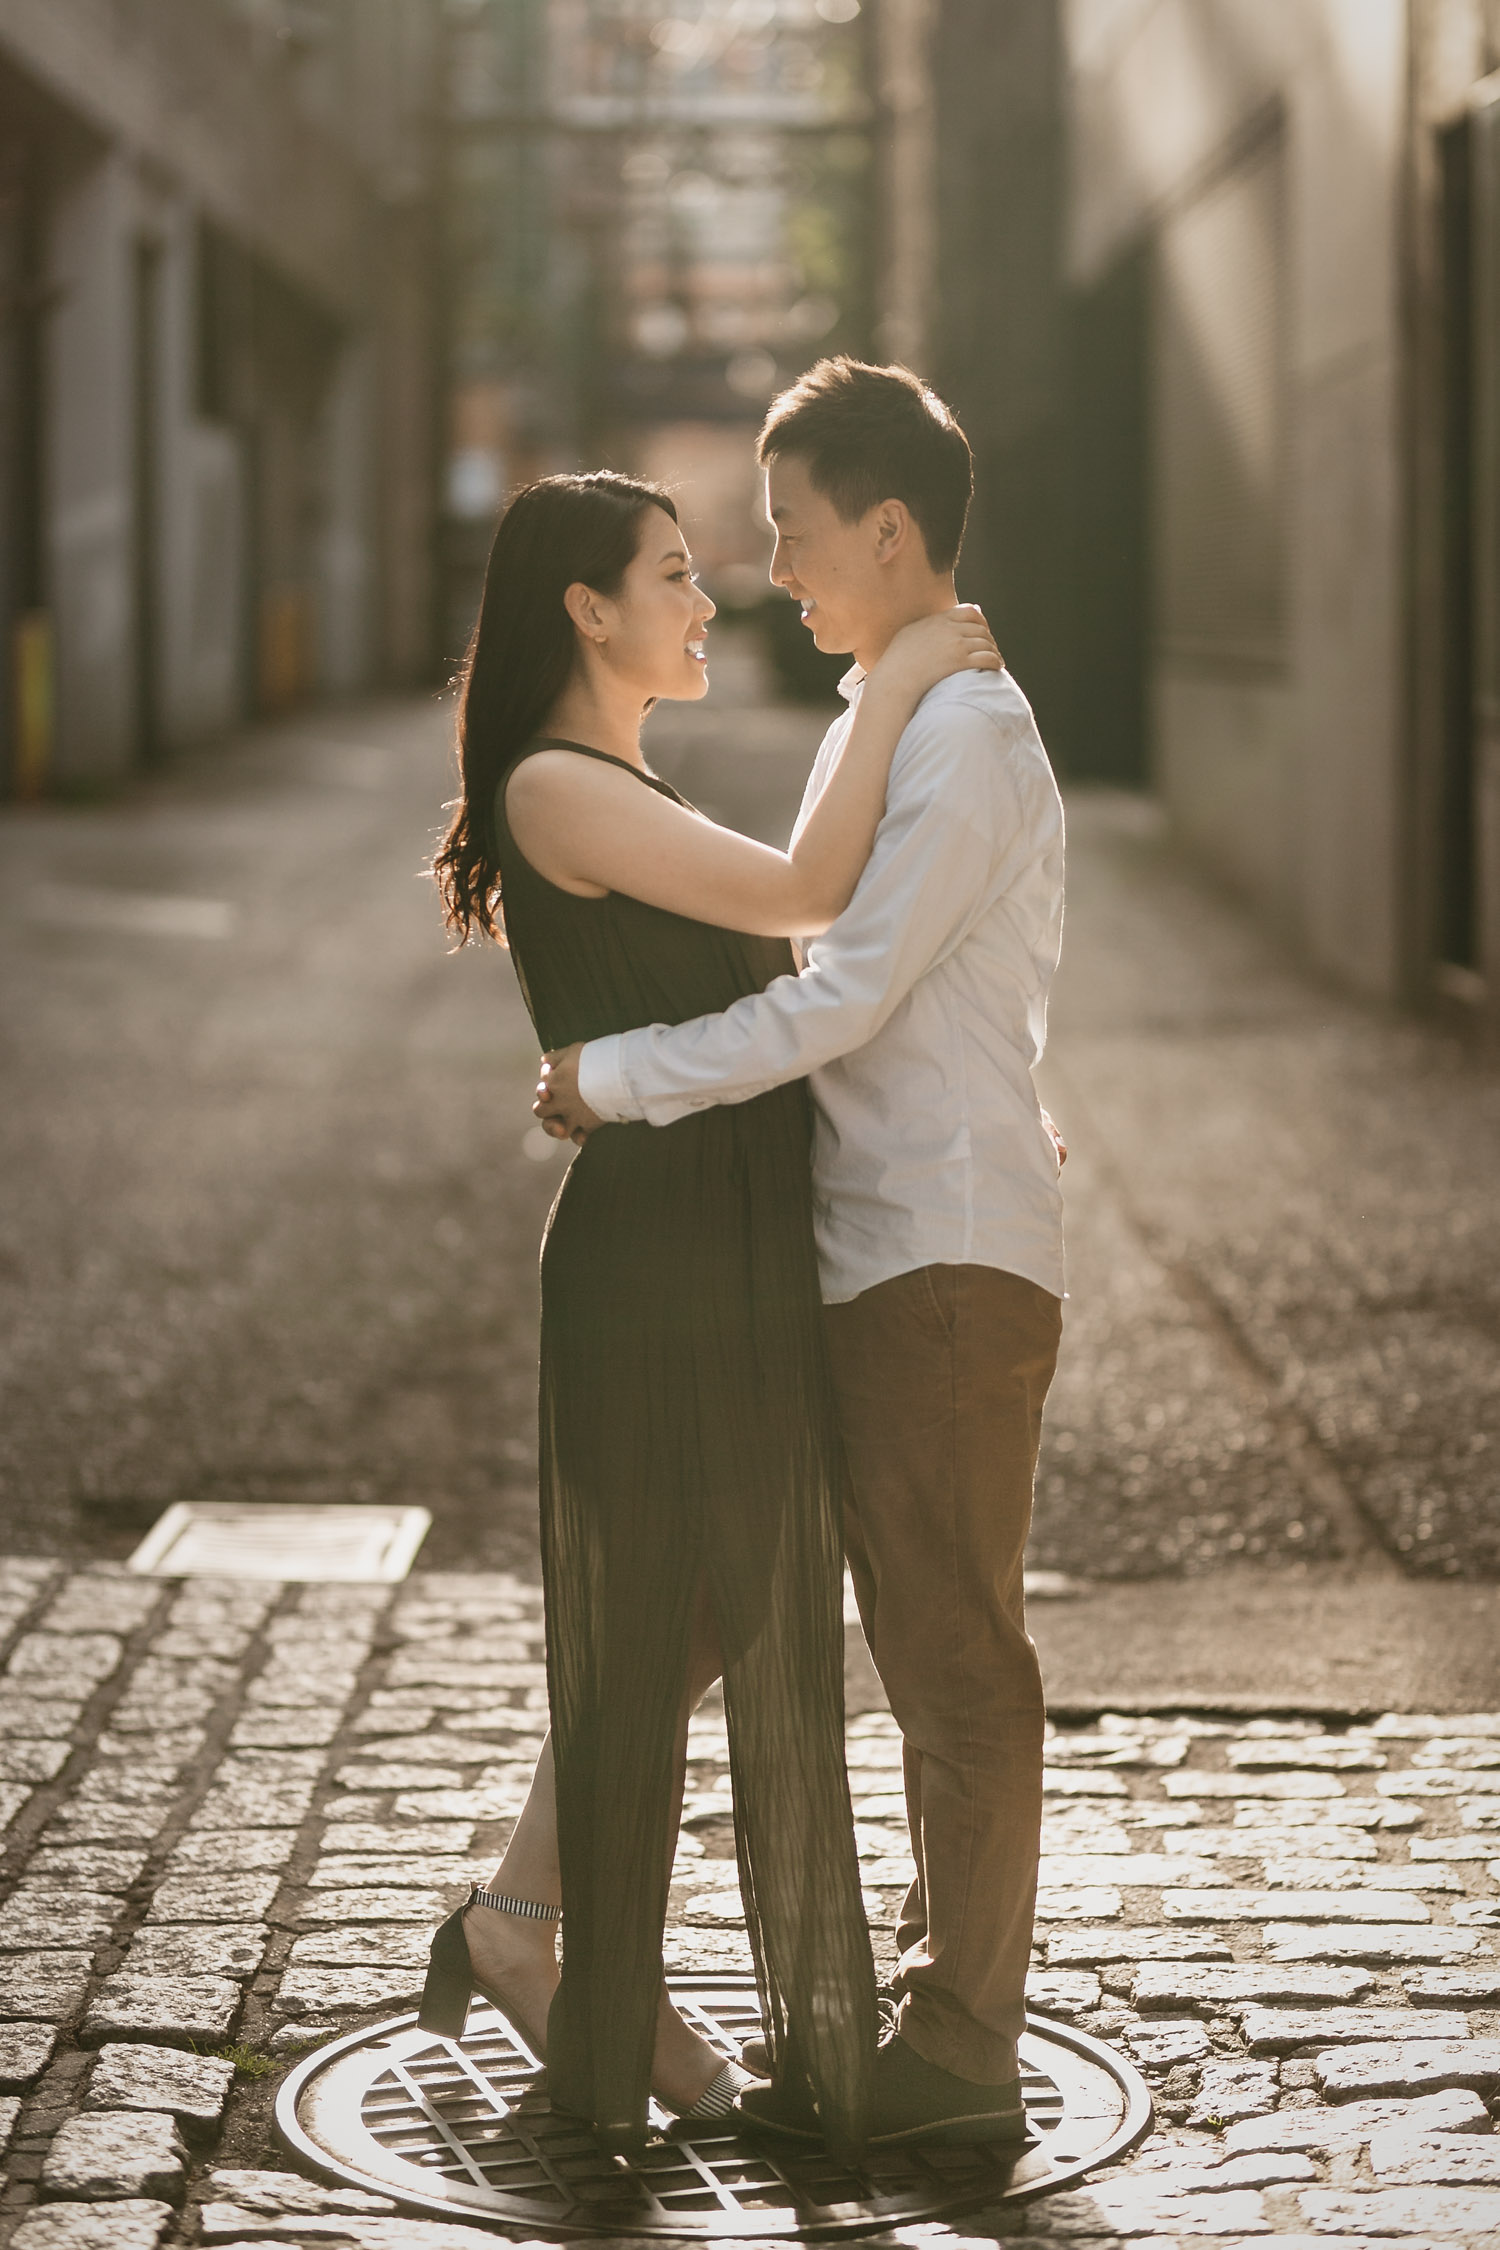 gastown engagement photography in vancouver bc during sunset or golden hour